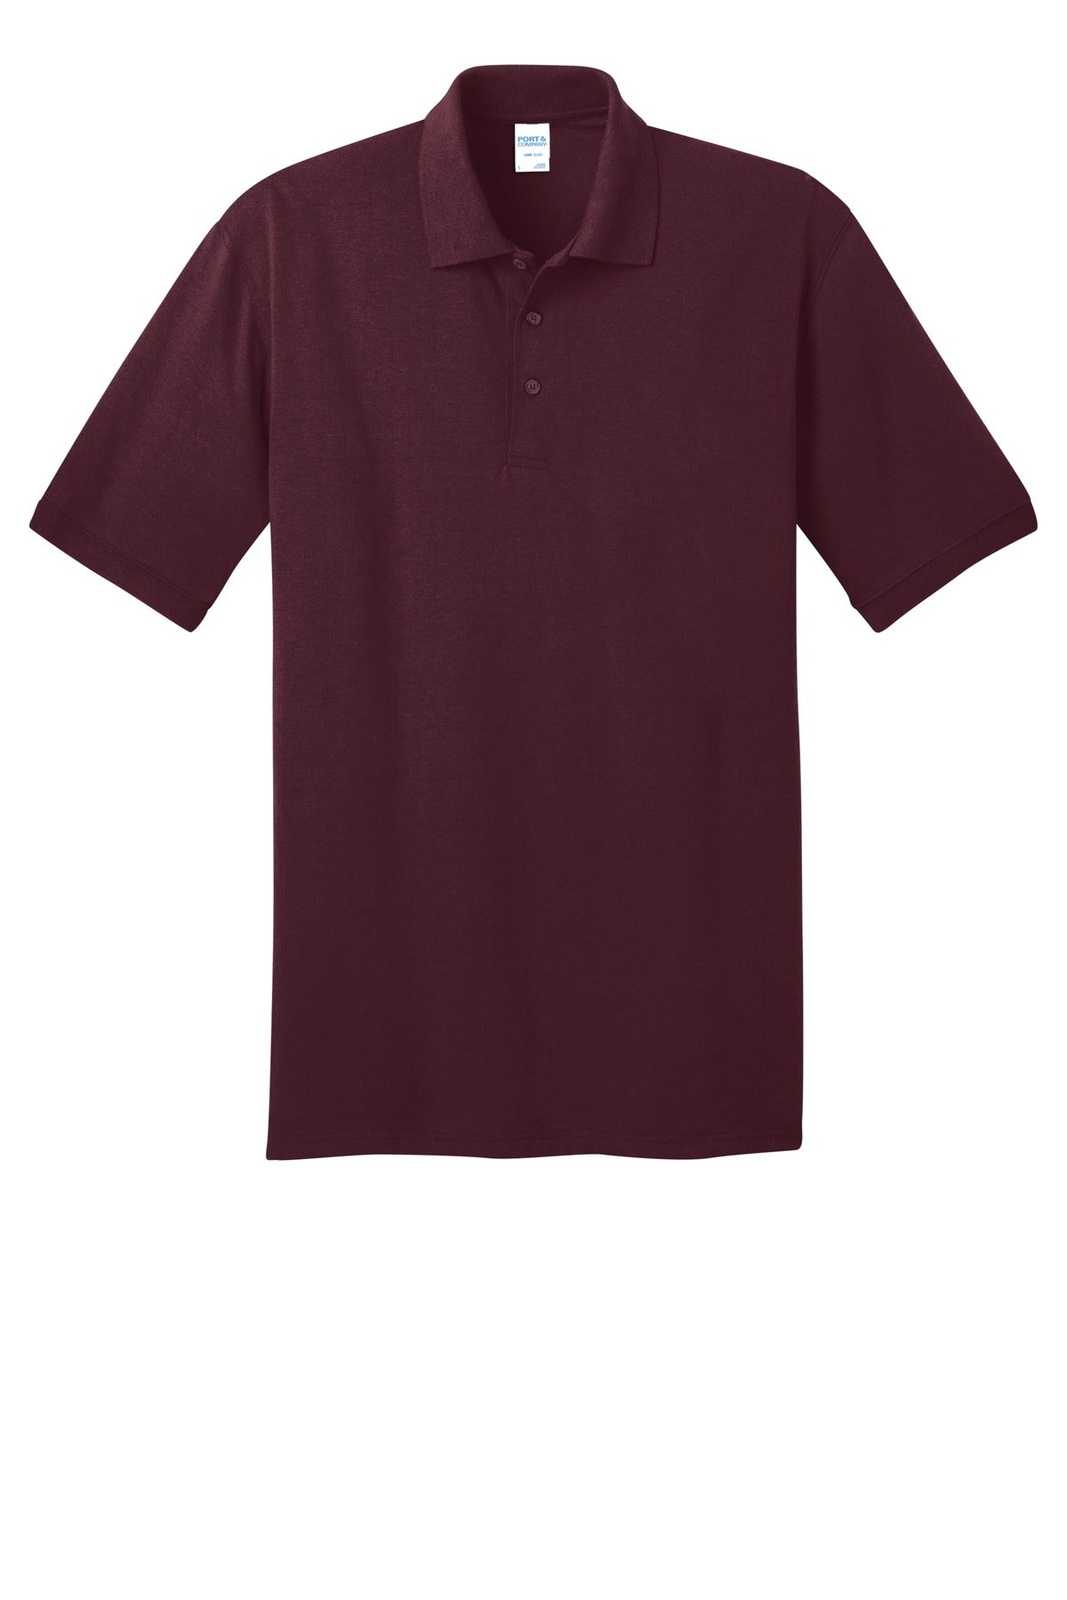 Port &amp; Company KP55T Tall Core Blend Jersey Knit Polo - Athletic Maroon - HIT a Double - 3